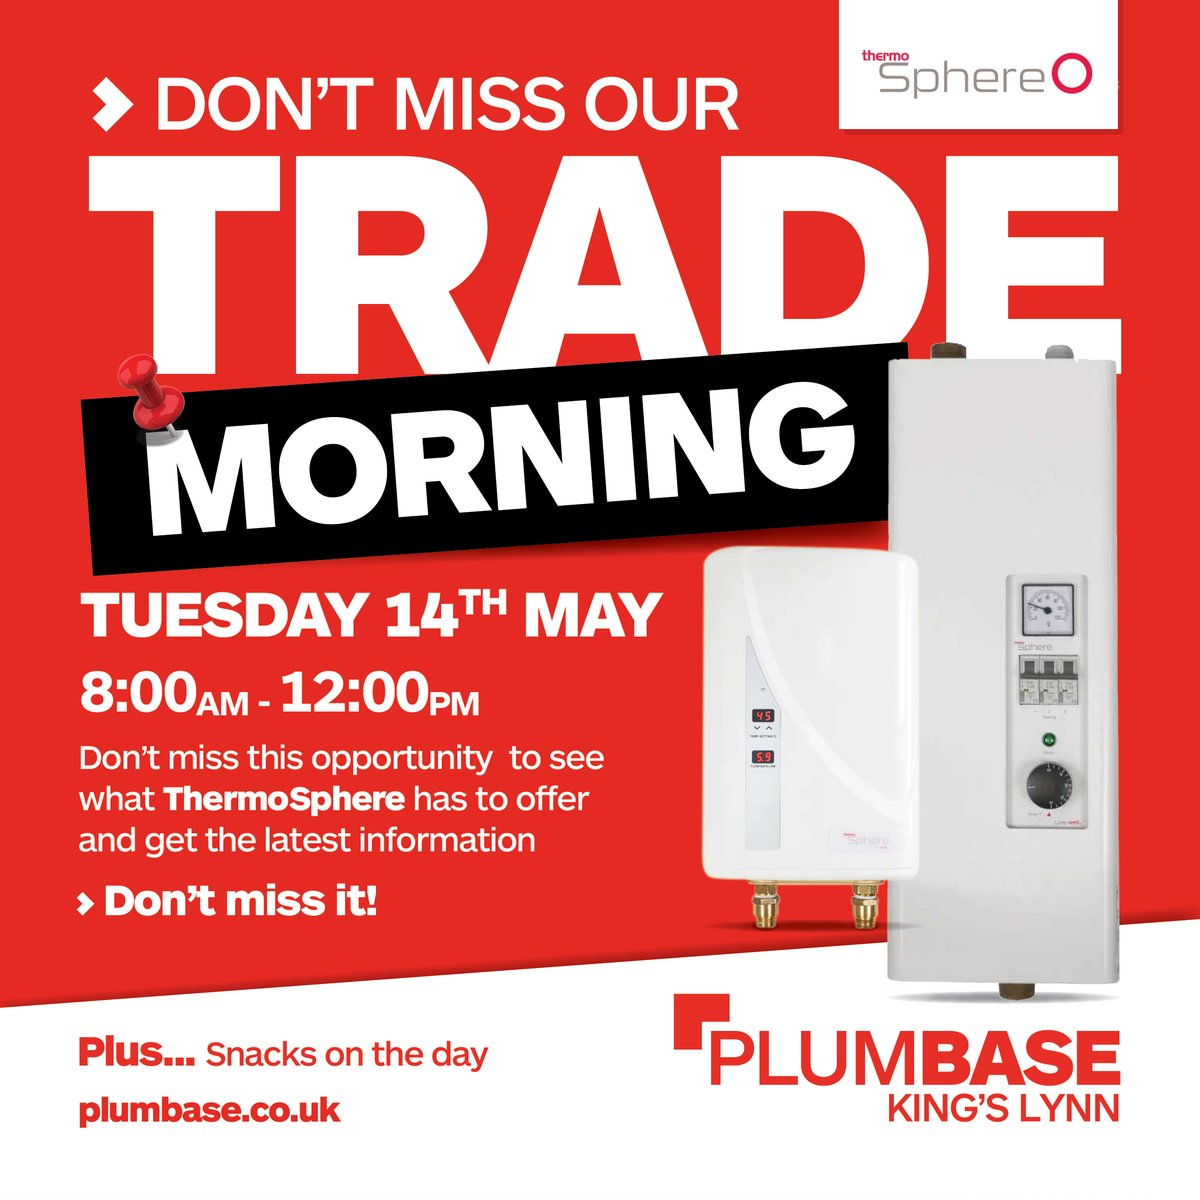 🔥THERMOSPHERE TRADE EVENT TUESDAY 14th MAY 8:00am-12:00pm @Plumbase KINGS LYNN. Come along and have a chat to ThermoSphere & find out the latest news, information and answer all your questions. Don't miss it 👀 plus snacks available on the day! #heating #boilers #plumbers